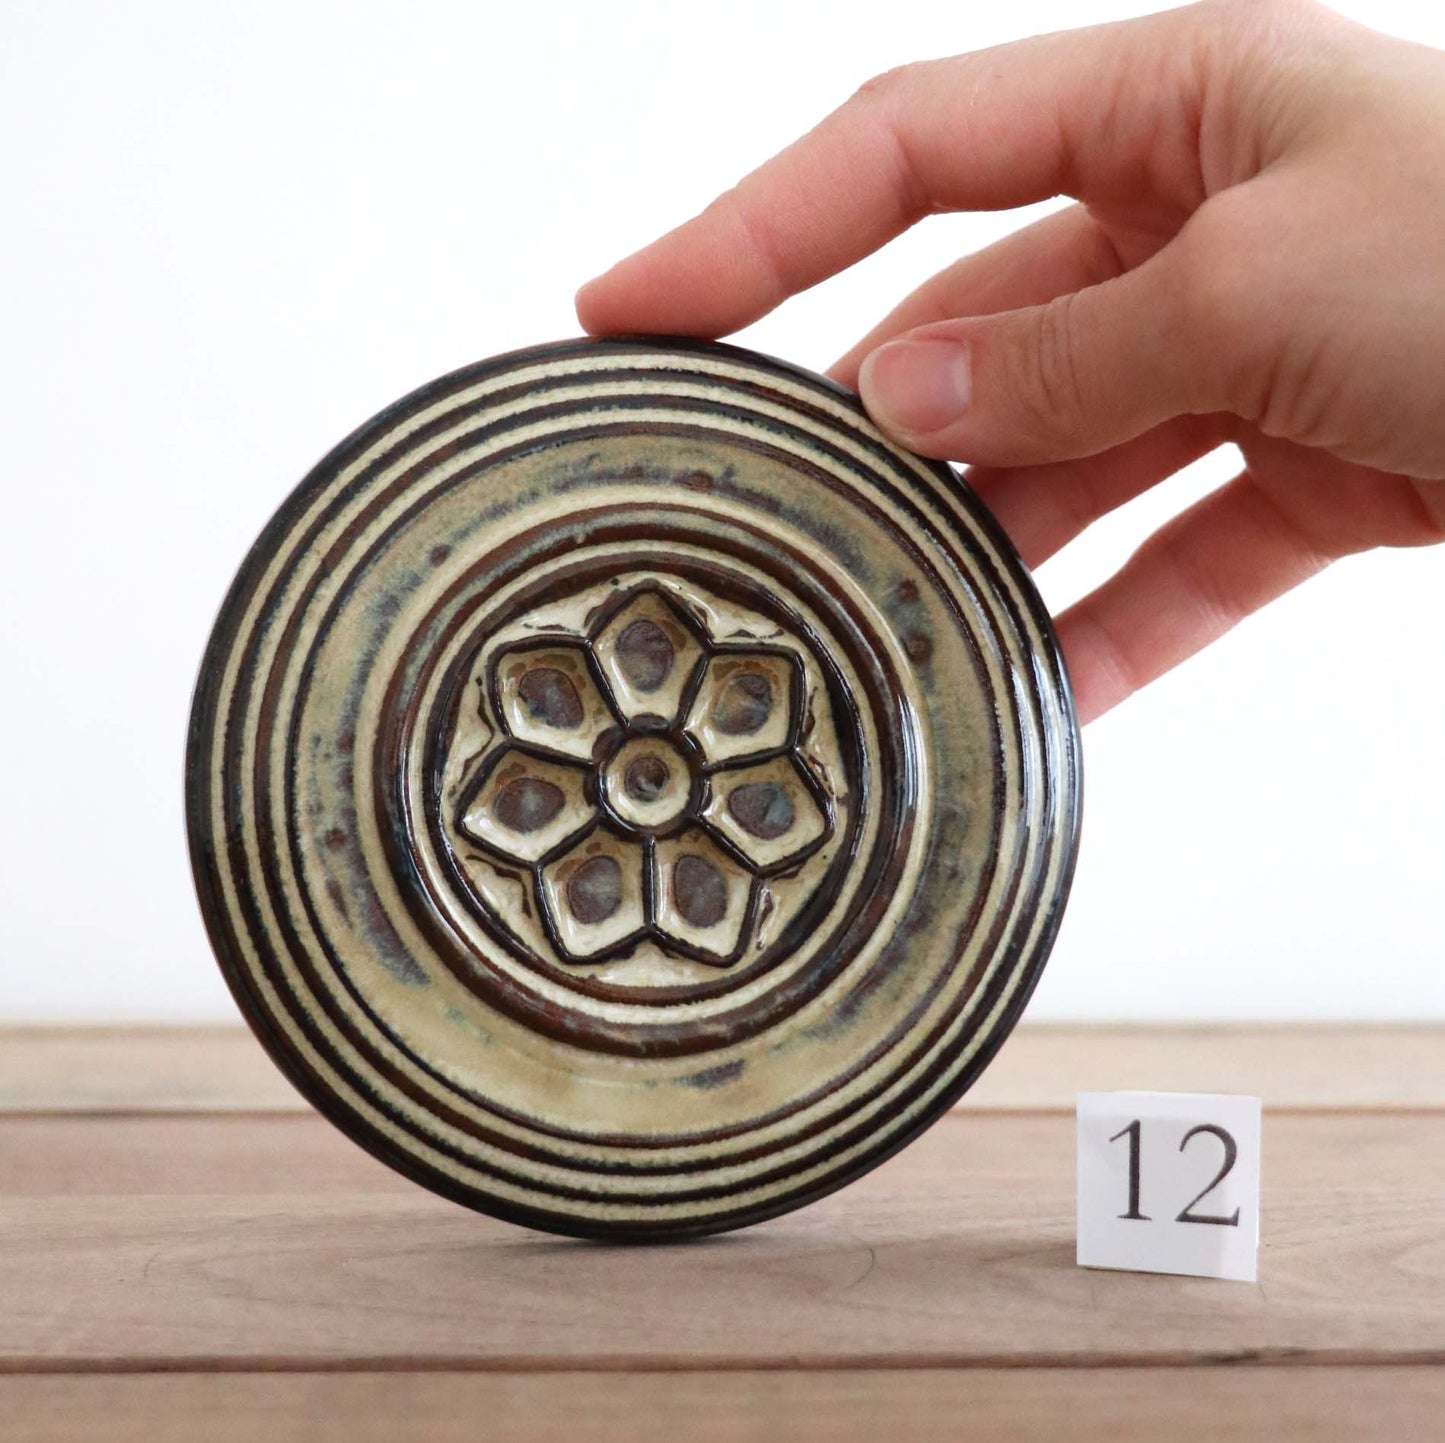 Round Rose Window Wall Tile: 12